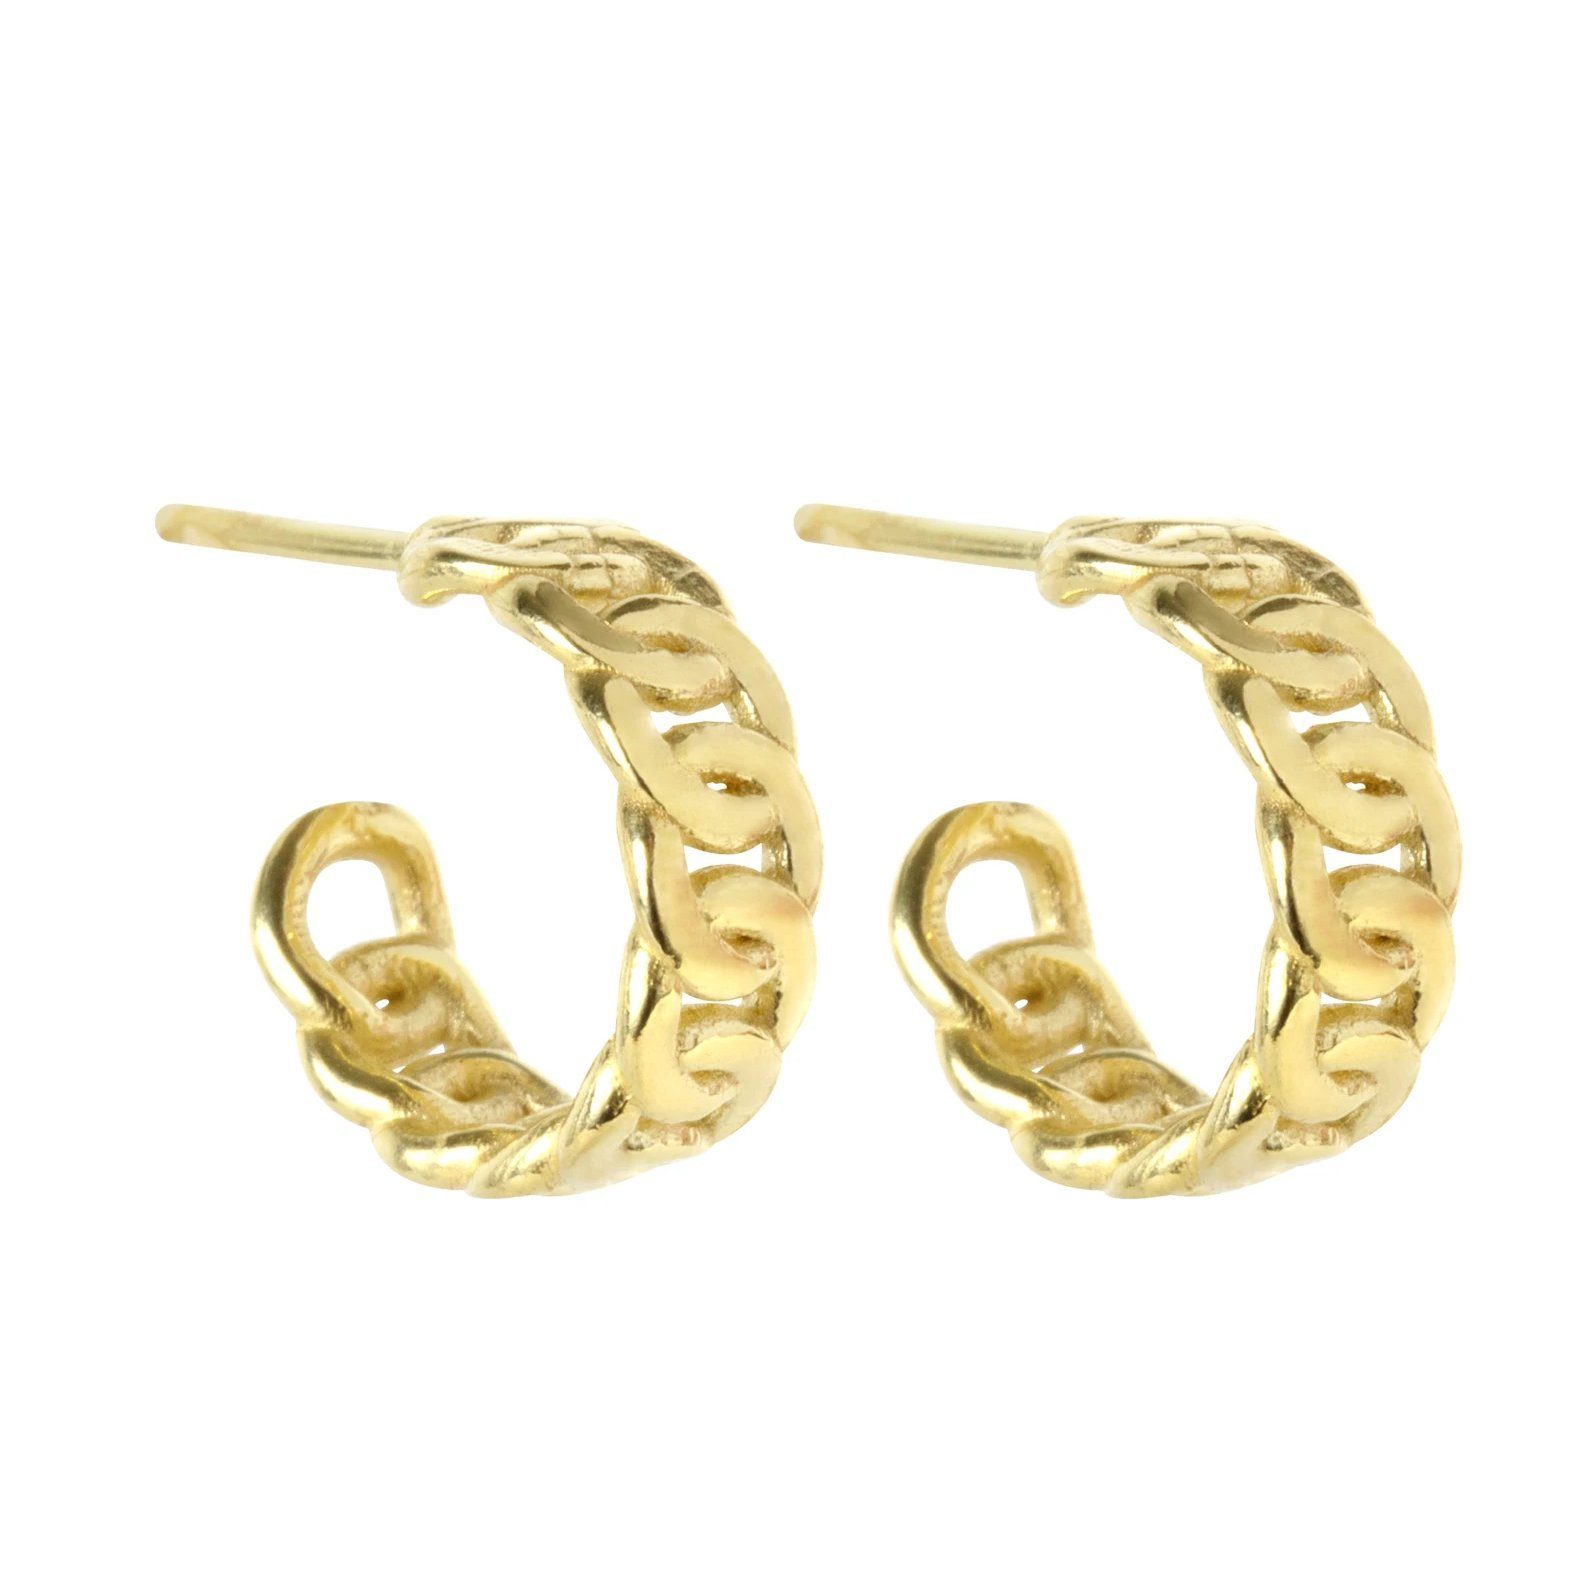 Katie Dean Jewelry Figaro Chain Ring - Gold - 8